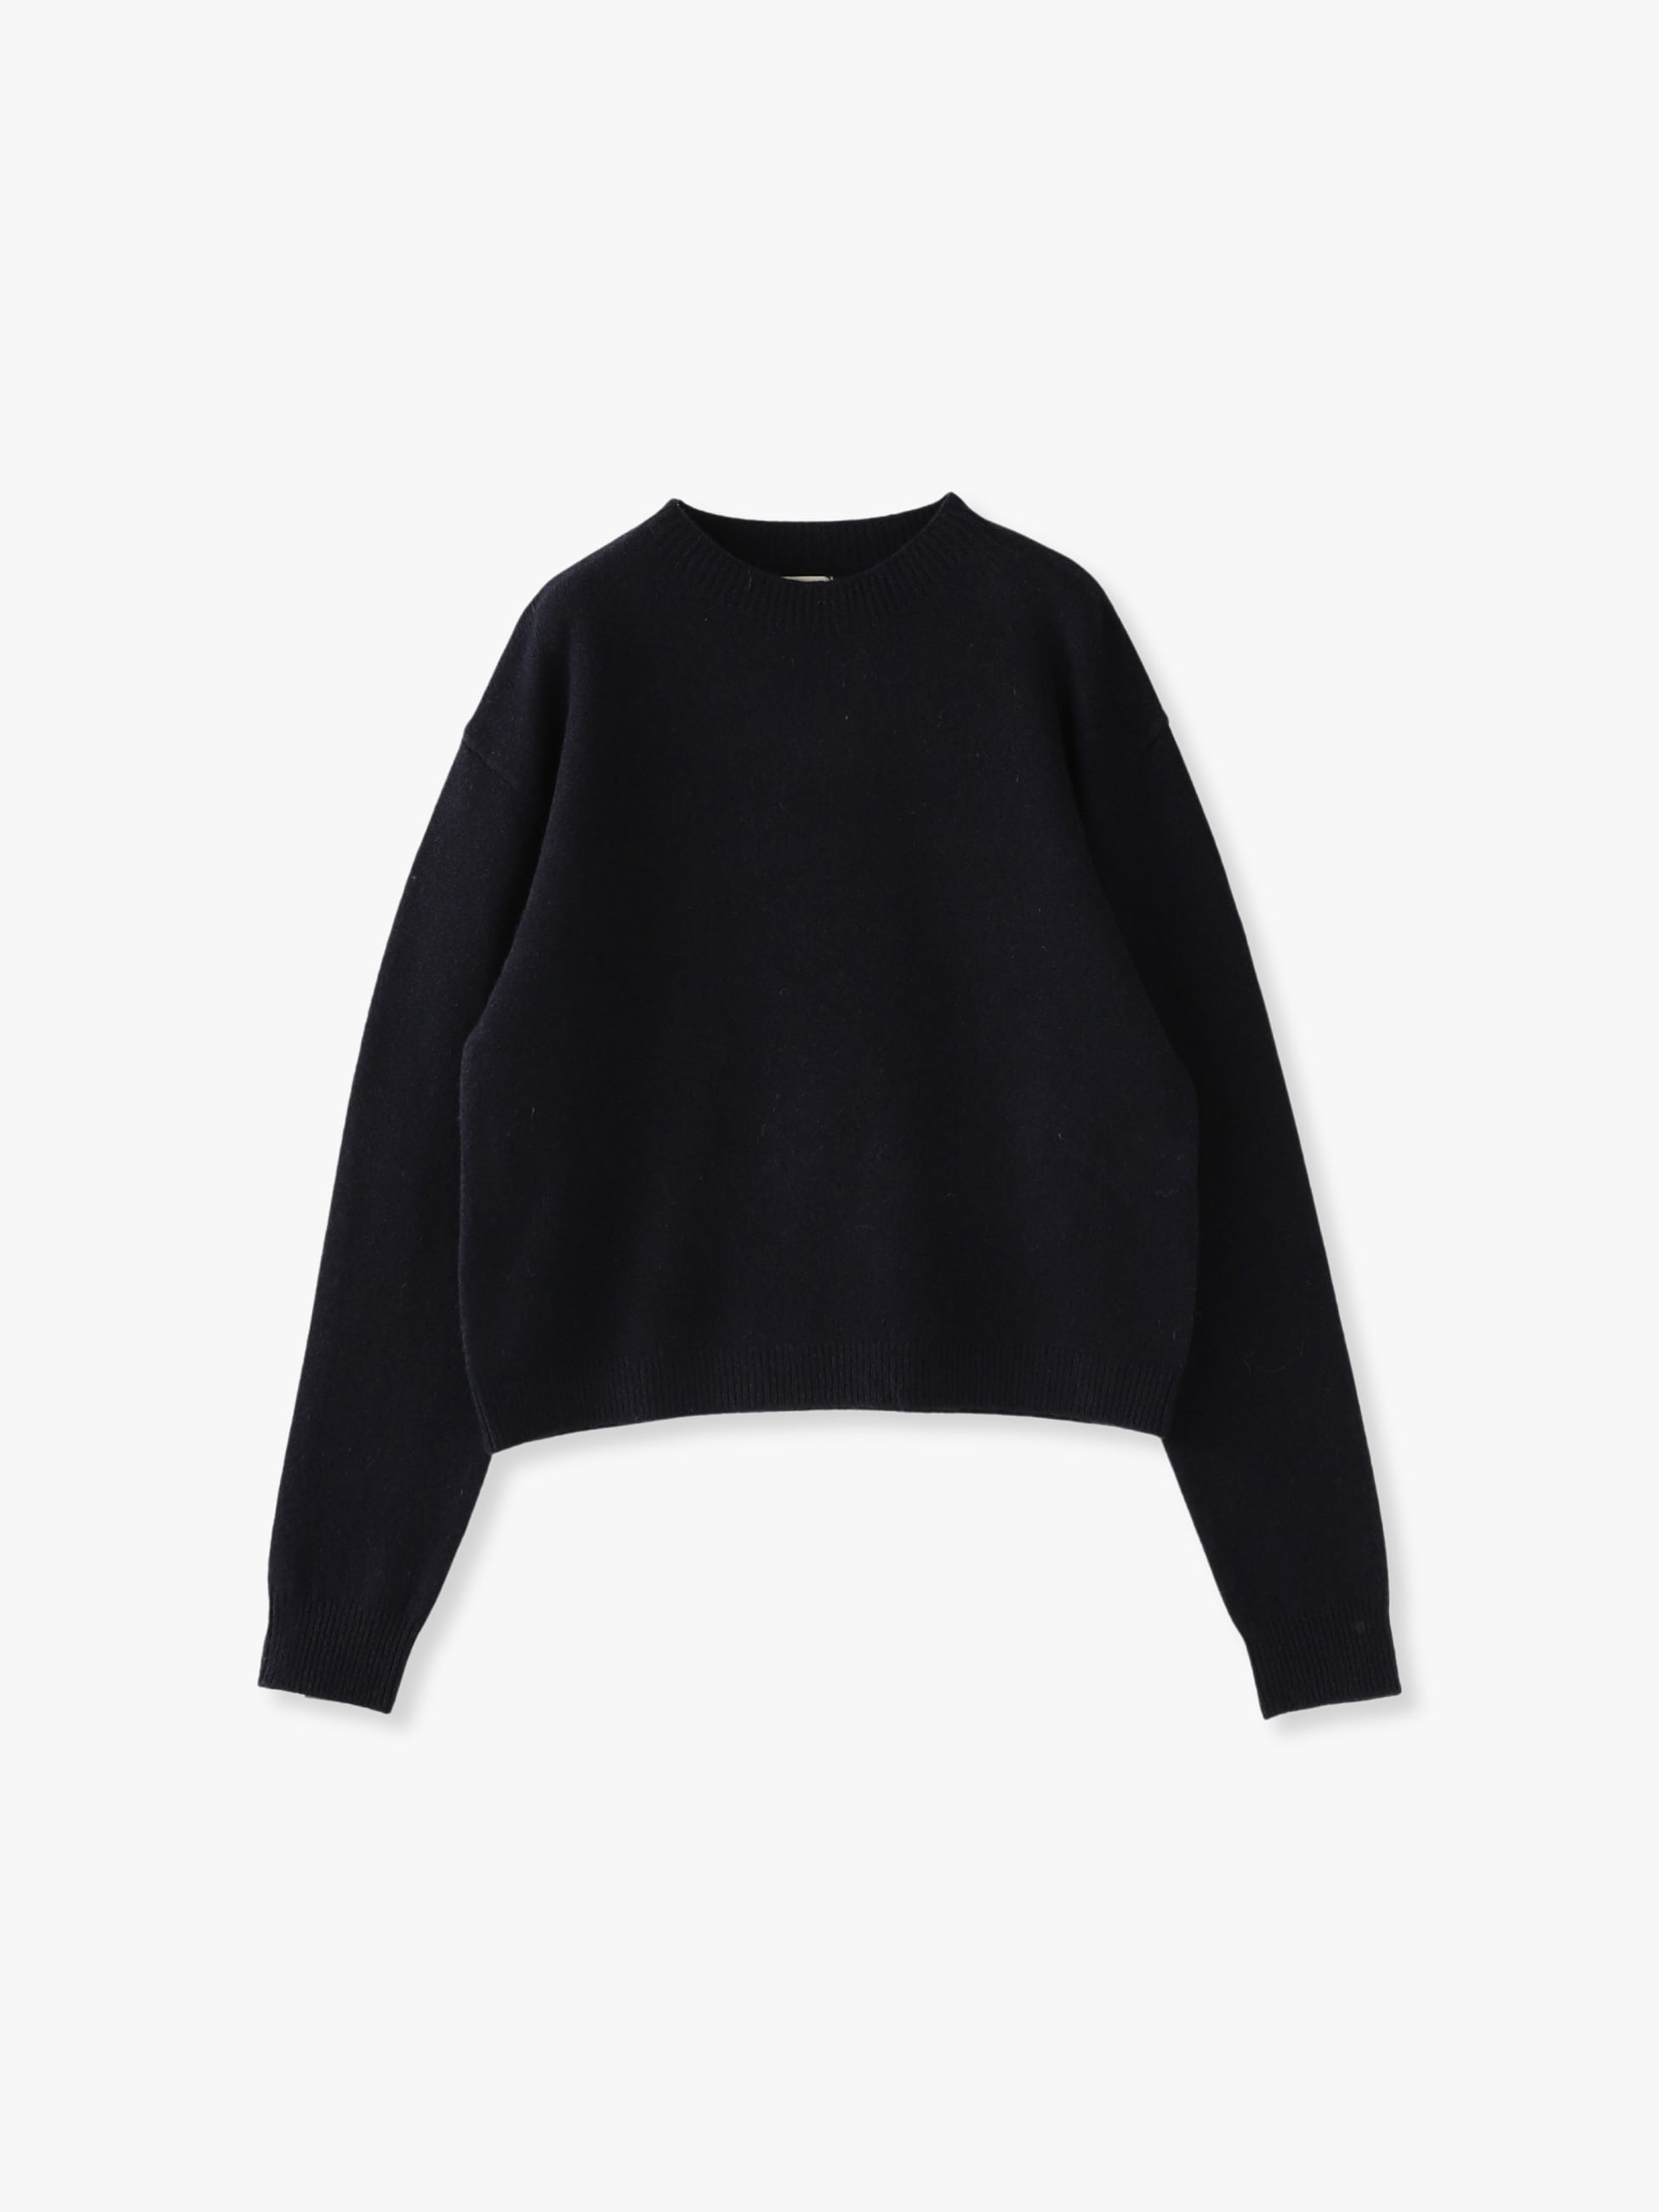 Cashmere Crew Neck Knit Pullover｜8100(エイティワンハンドレッド